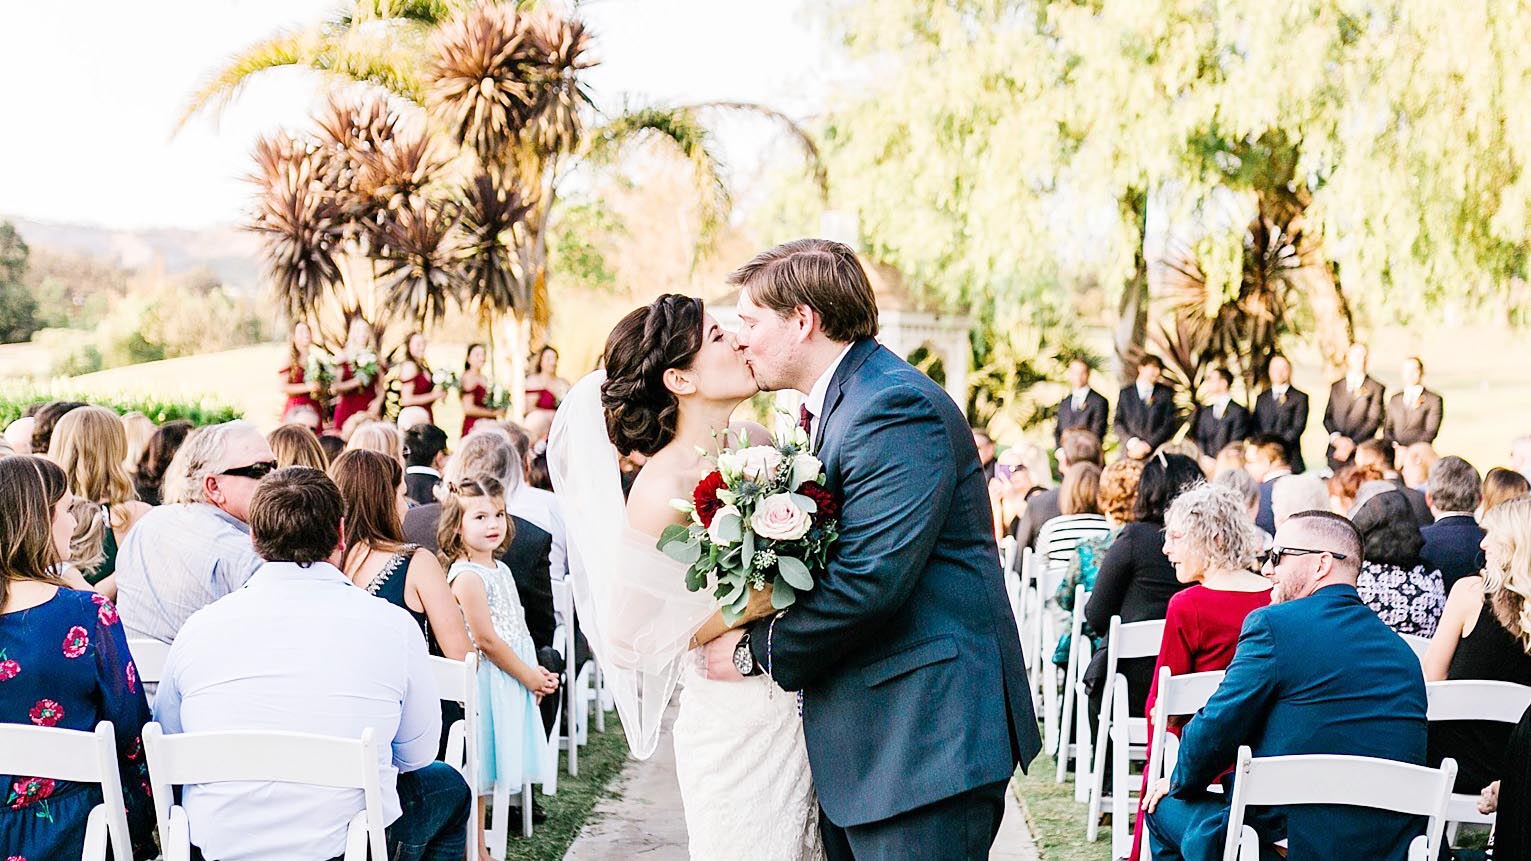 Central California Weddings: An Ultimate Guide